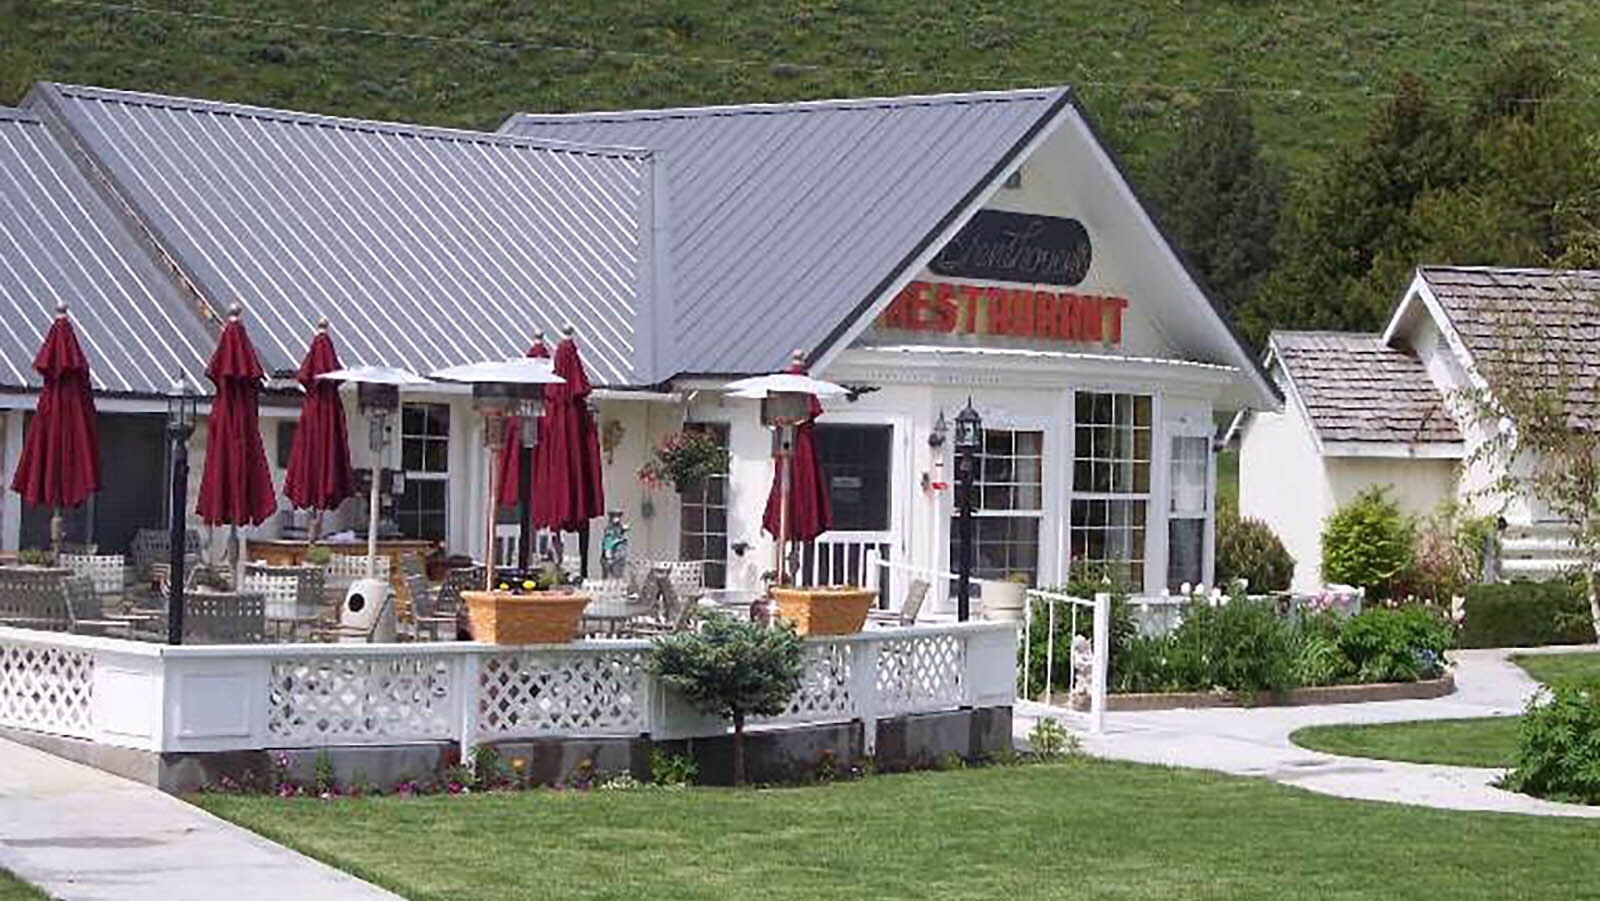 Brenthoven’s Restaurant was part of the Nordic Inn and the city of Alpine for over 35 years.